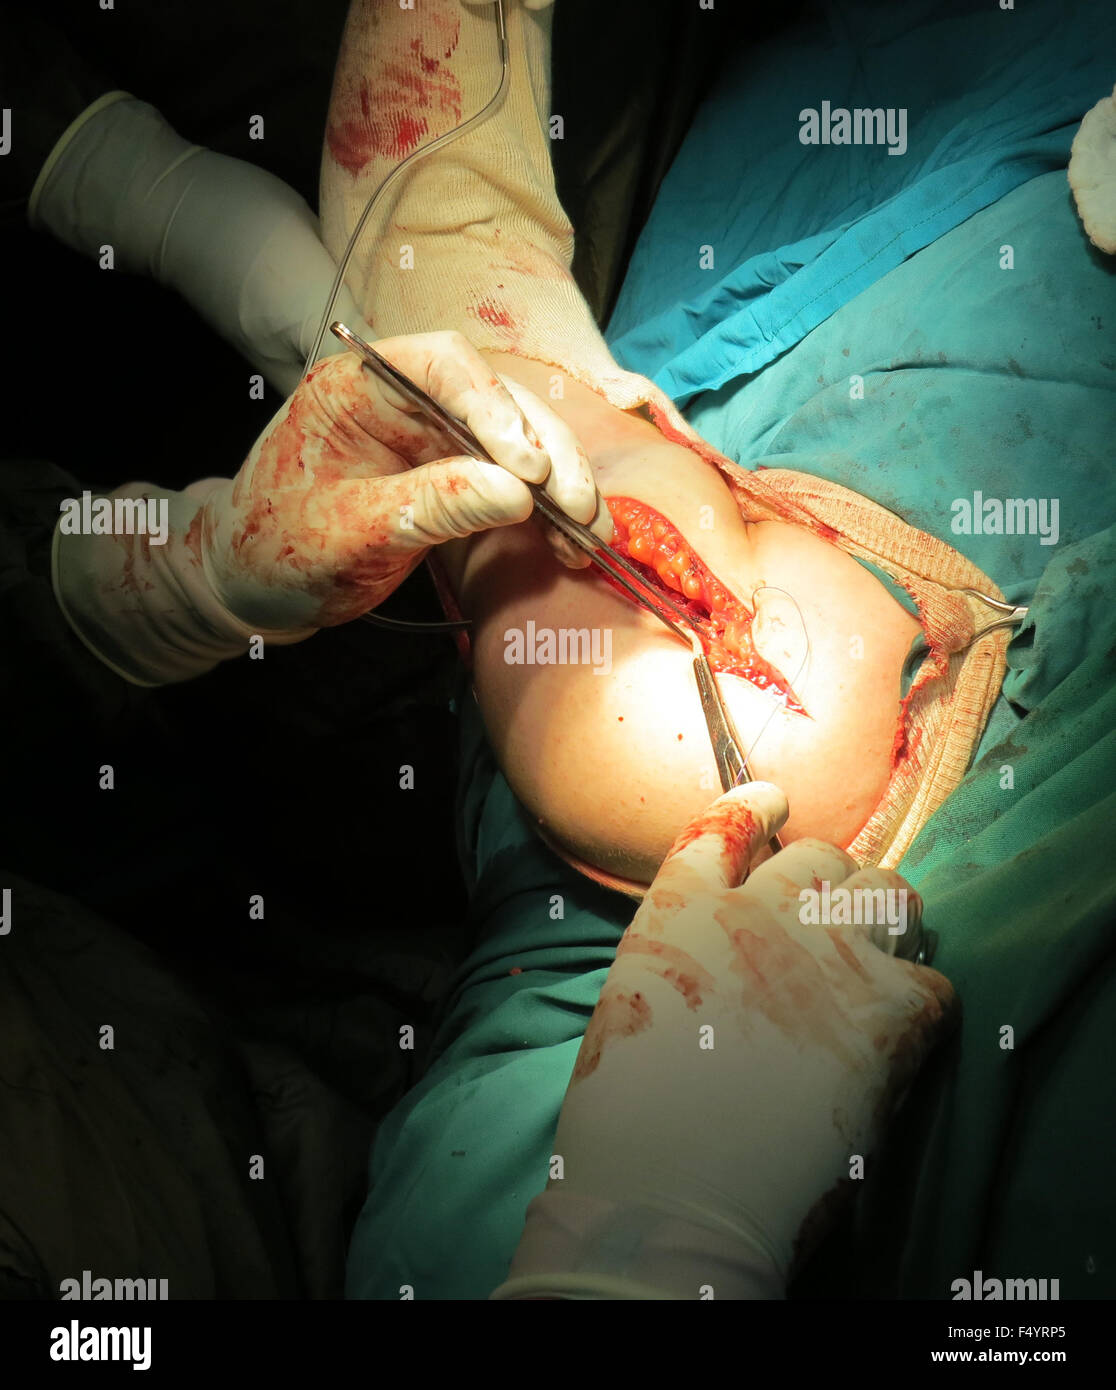 Orthopedic doctors performing a surgery on the injured arm of a patient. Stock Photo